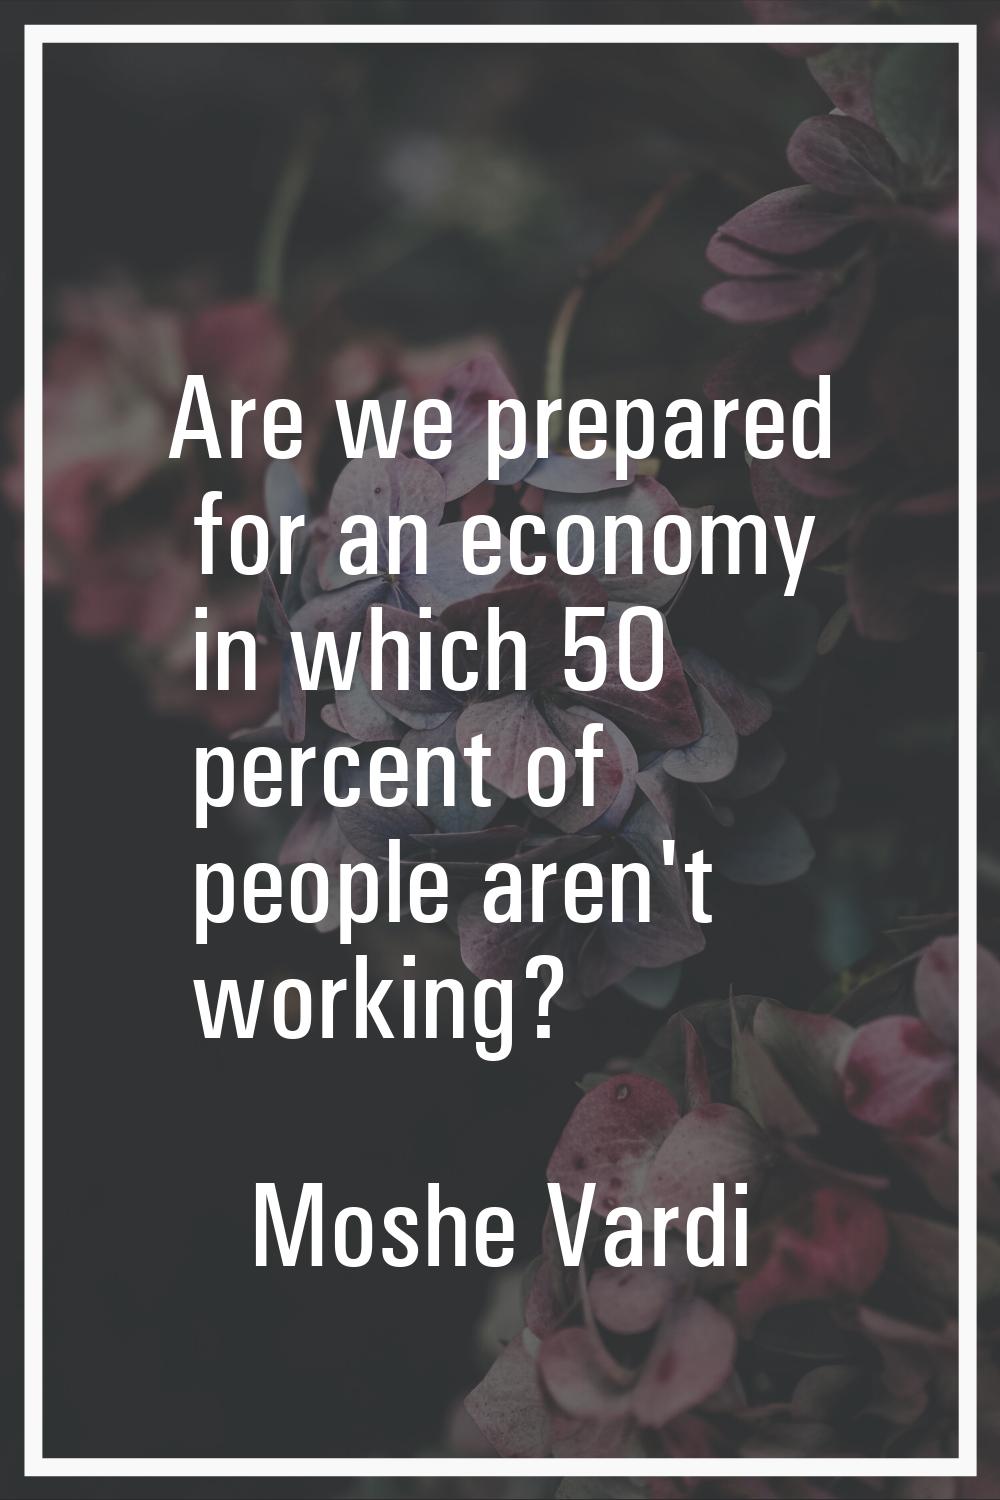 Are we prepared for an economy in which 50 percent of people aren't working?